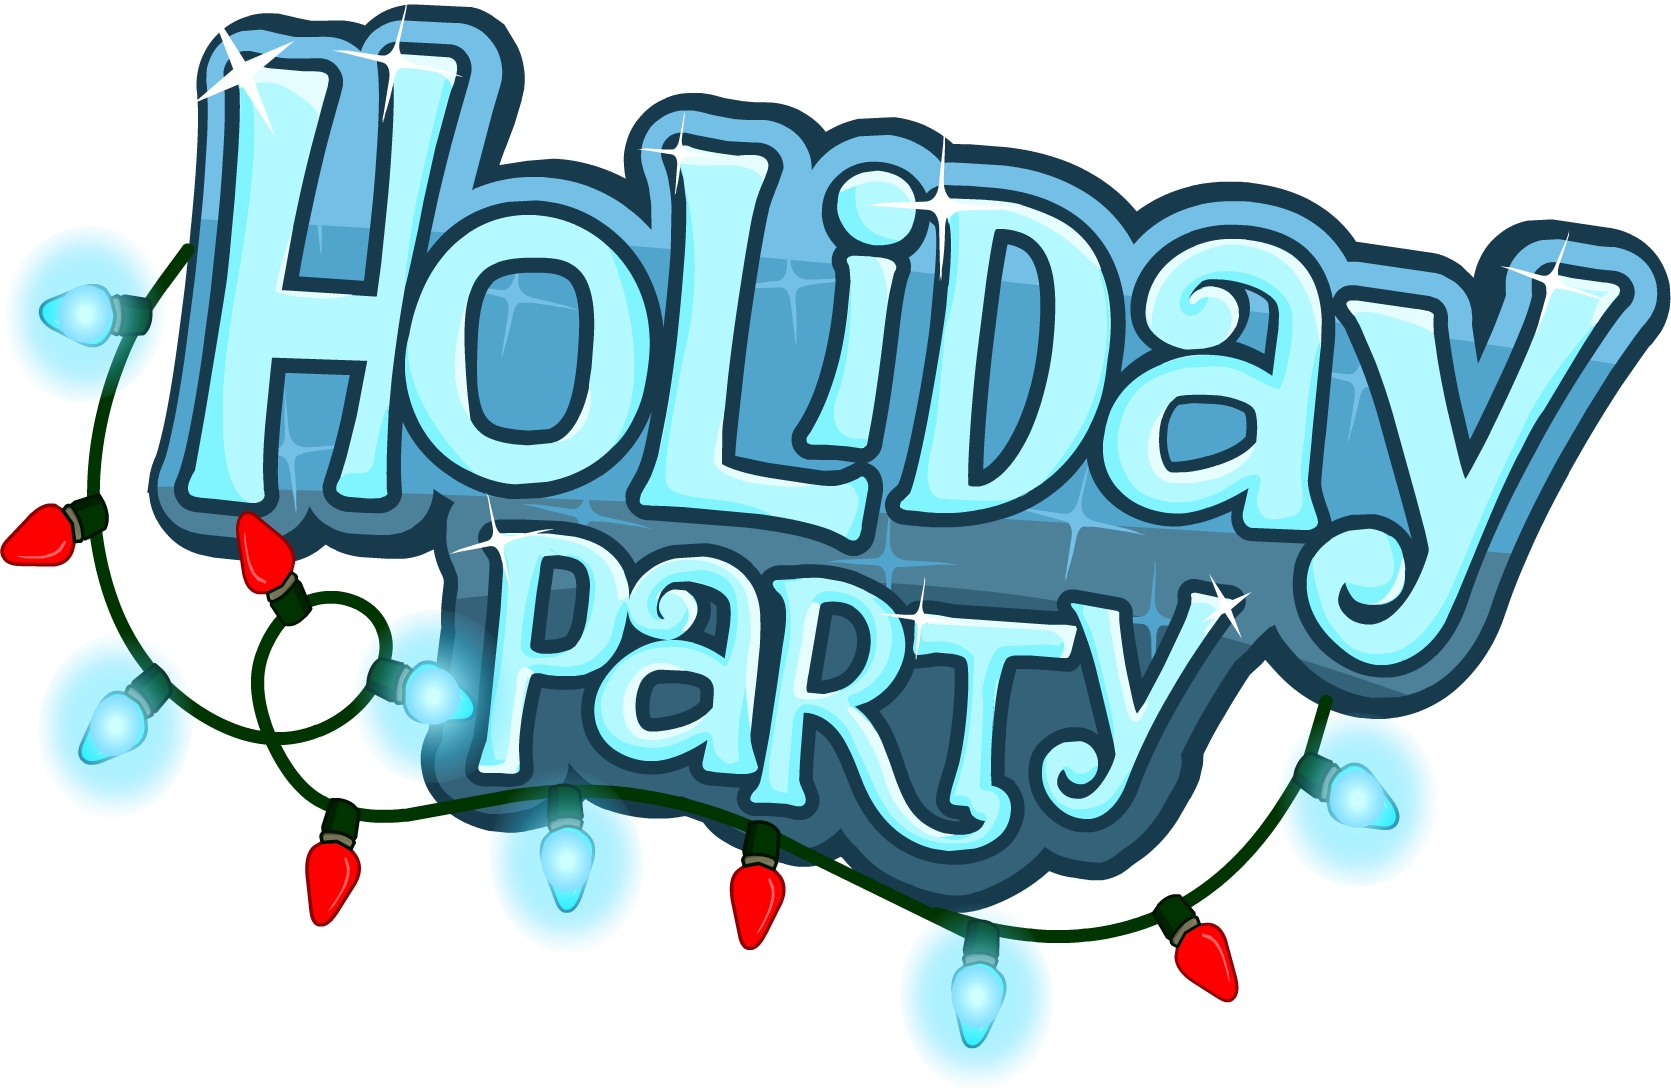 FVCC Holiday Party - January 9, 2016